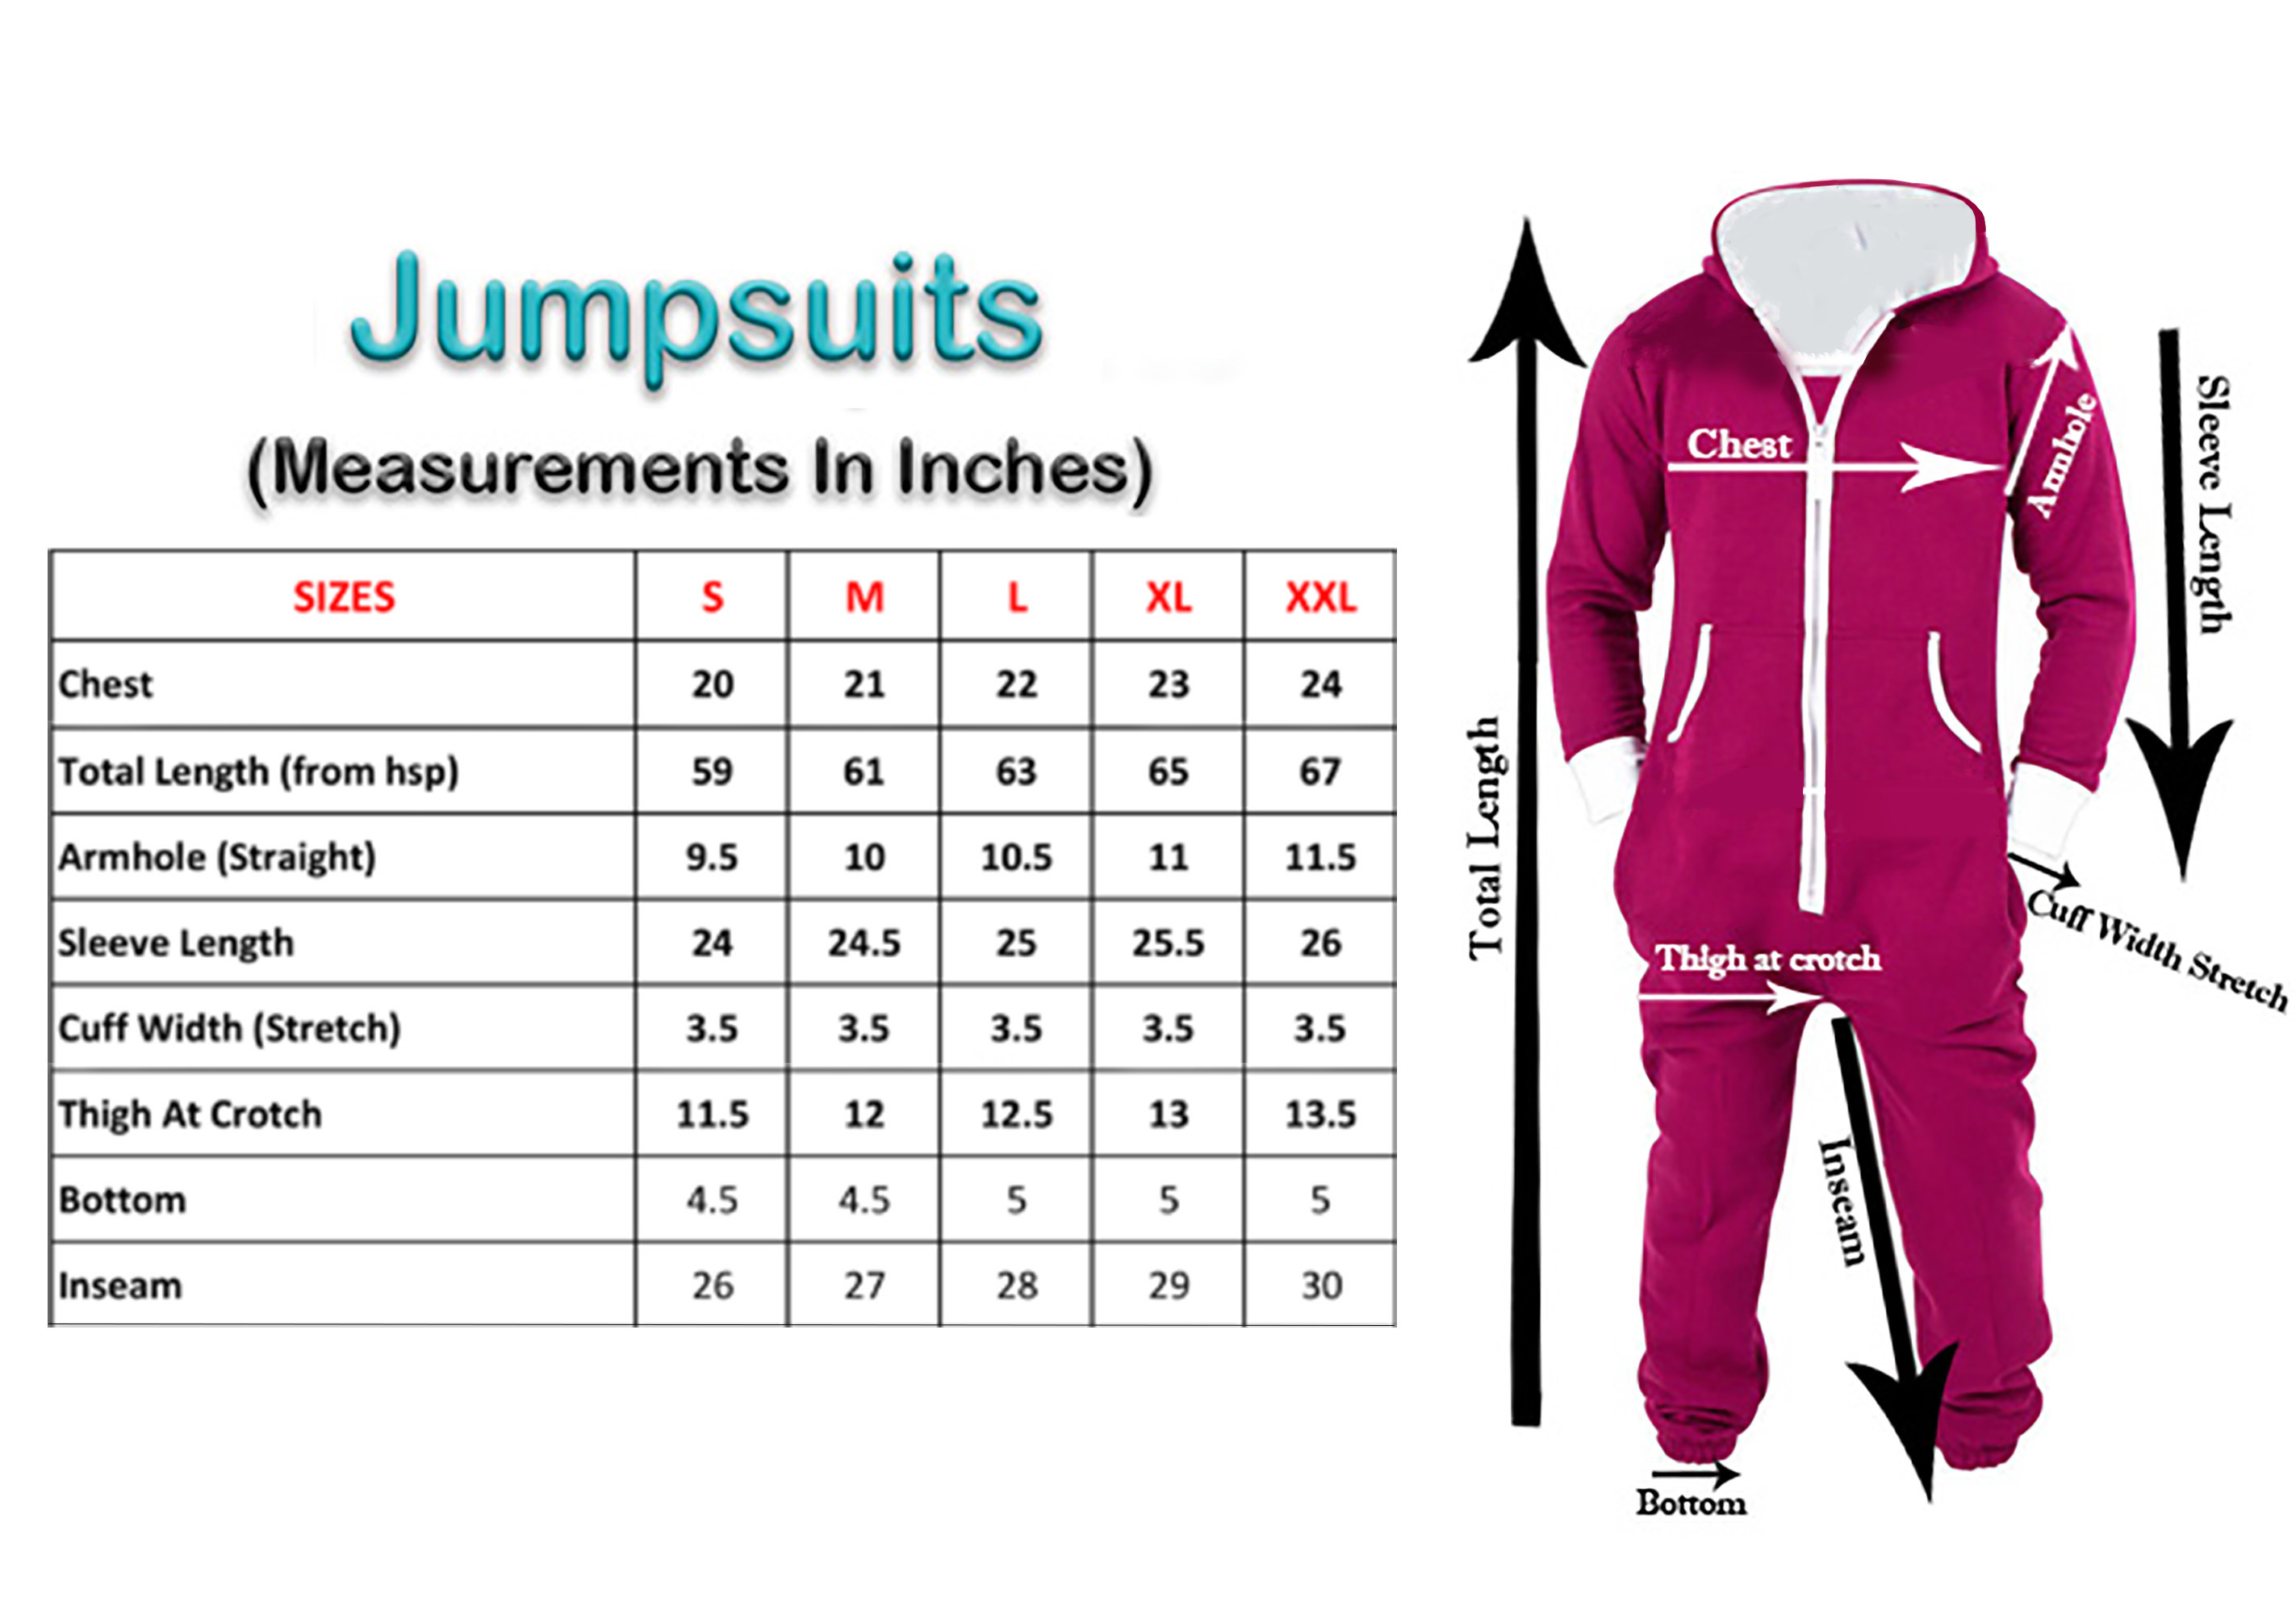 Men's One-Piece Non-Footed Pajama Onesie0 Adult Fleece Hooded Playsuit Jumpsuit 